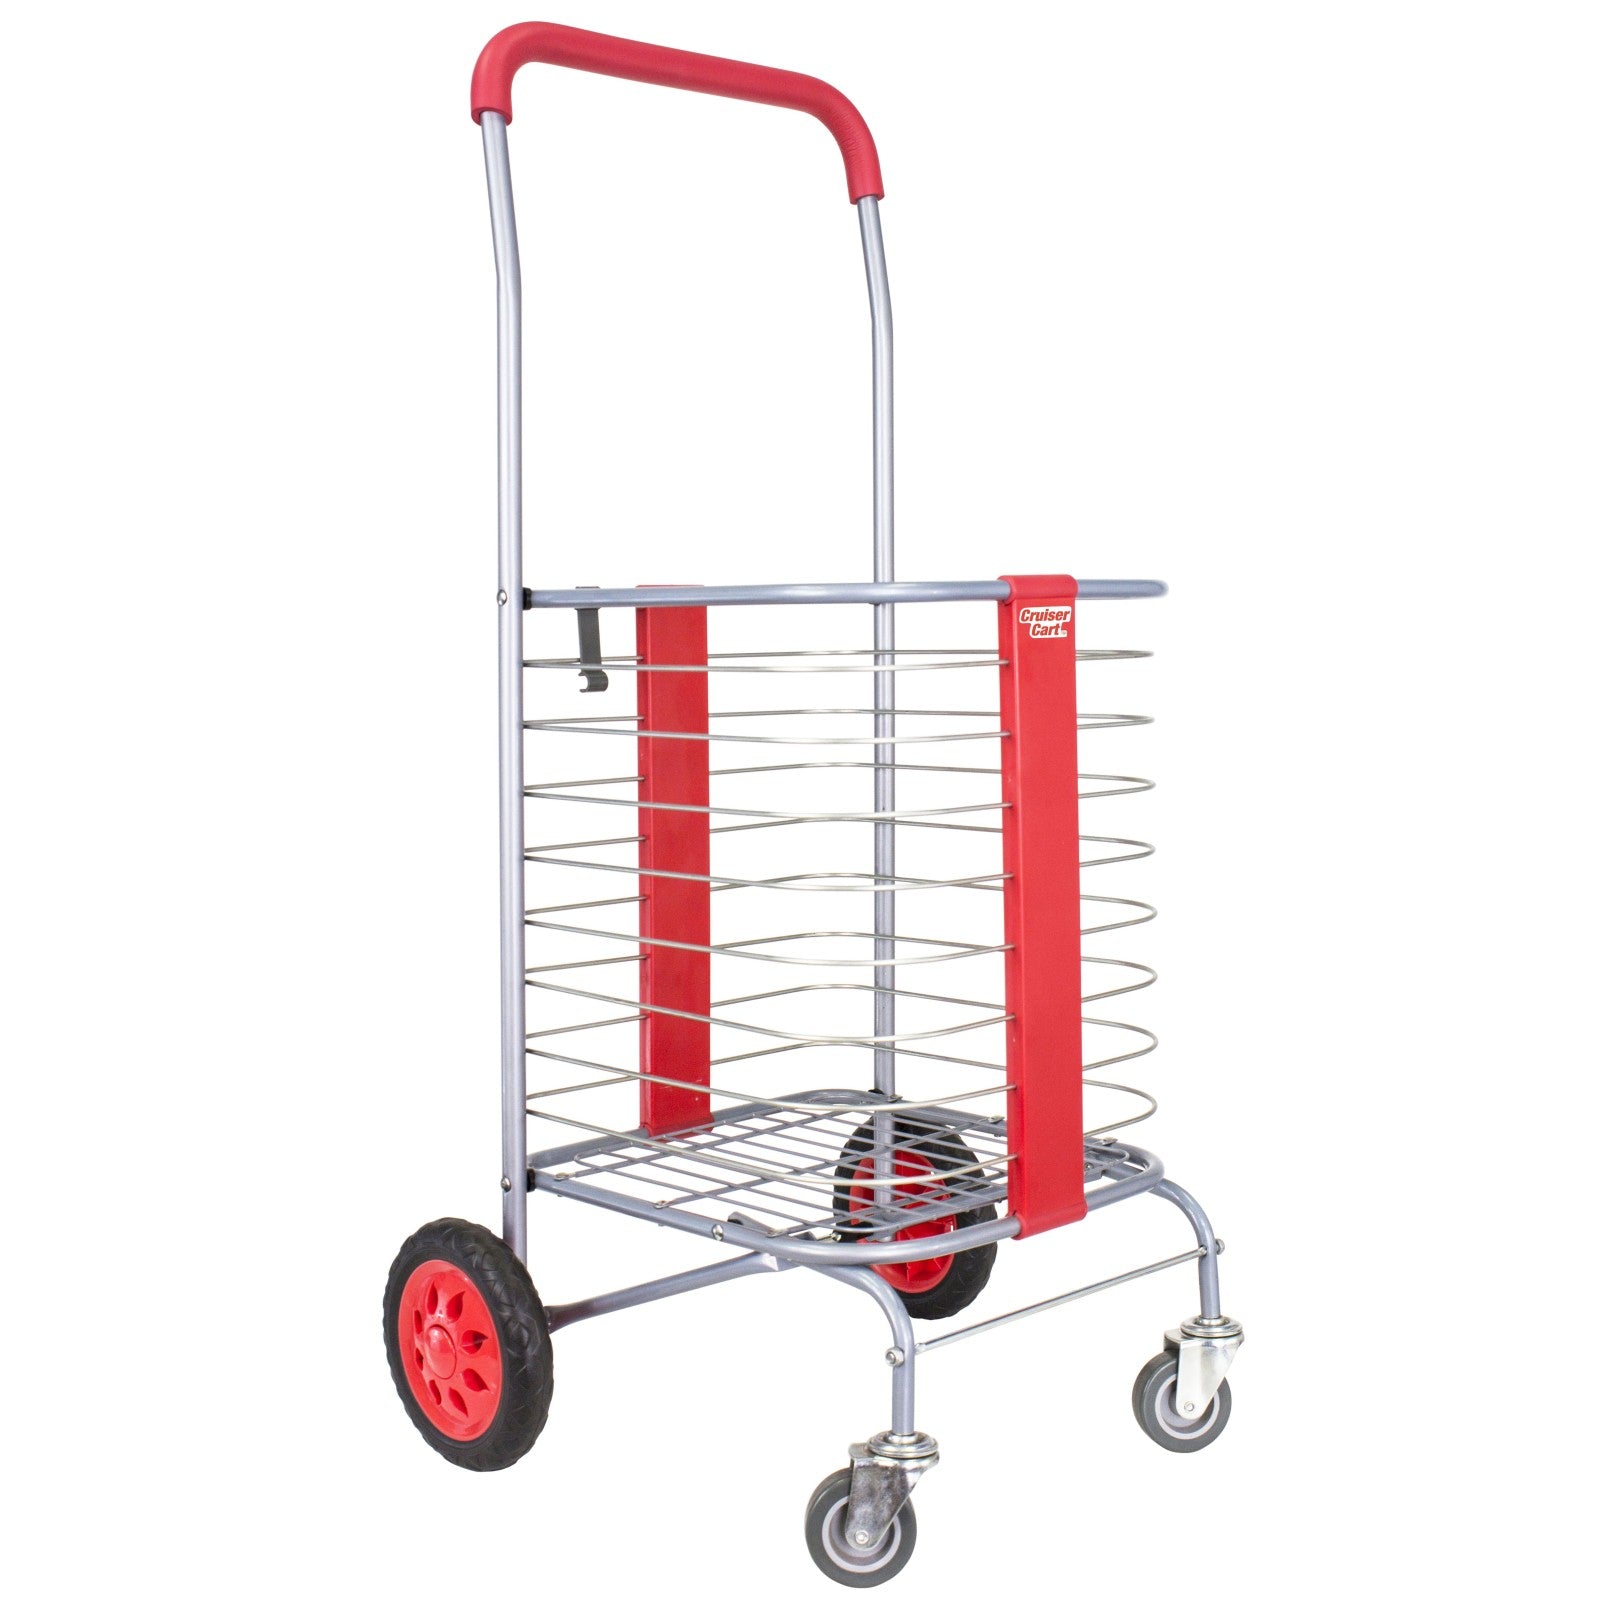 Dbest Products Cruiser Cart Urban 360 Folding Shopping Grocery Collapsible  Laundry Basket On Wheels Foldable Utility : Target